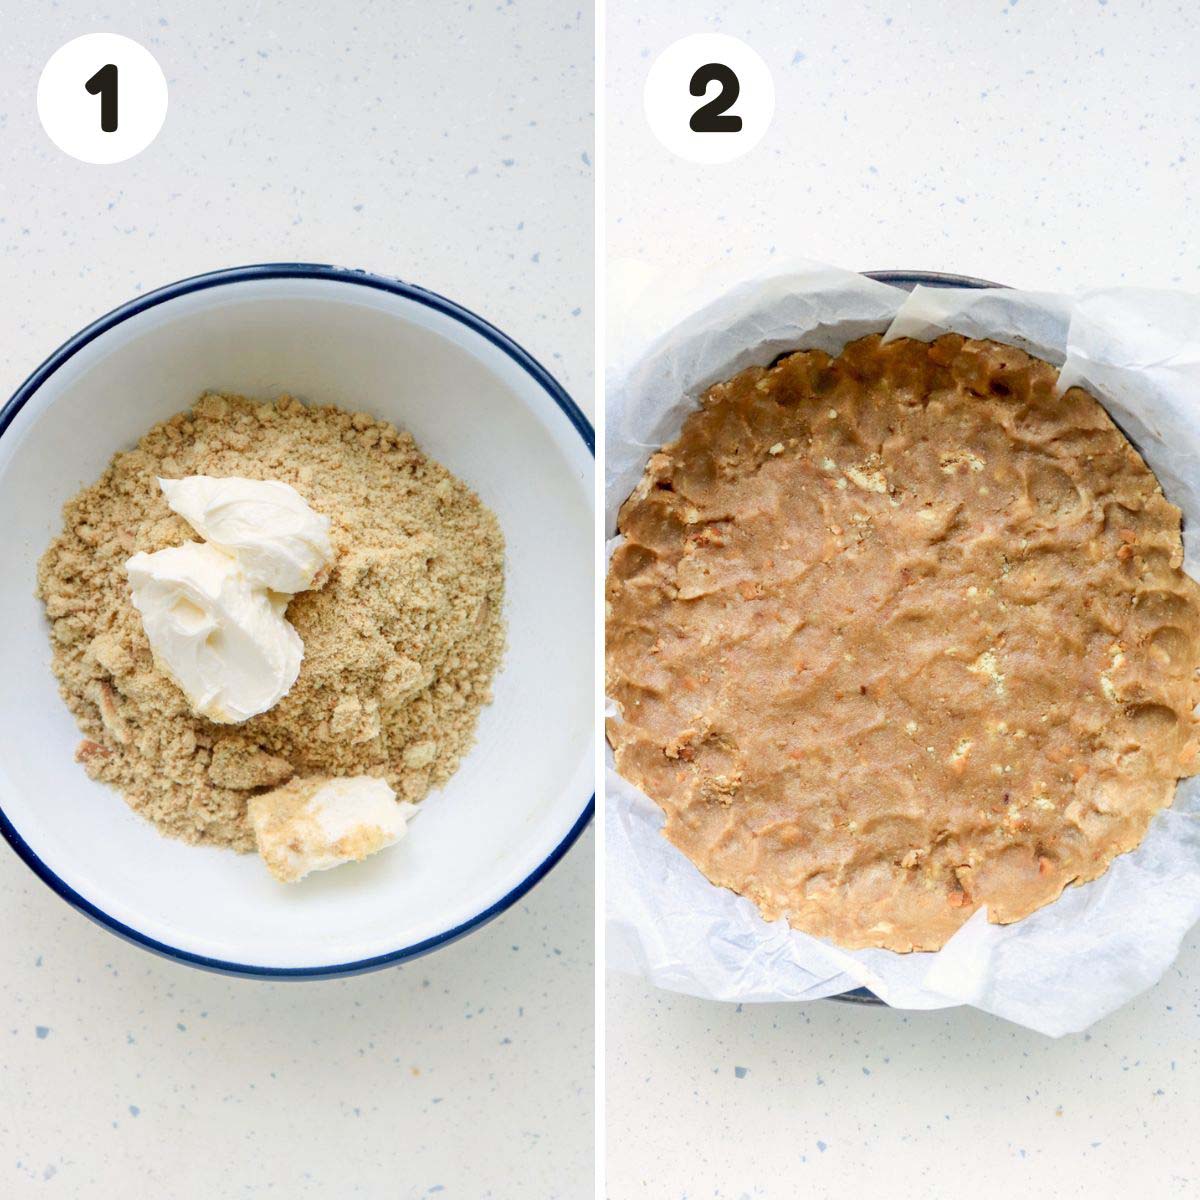 Steps to make the pie crust.